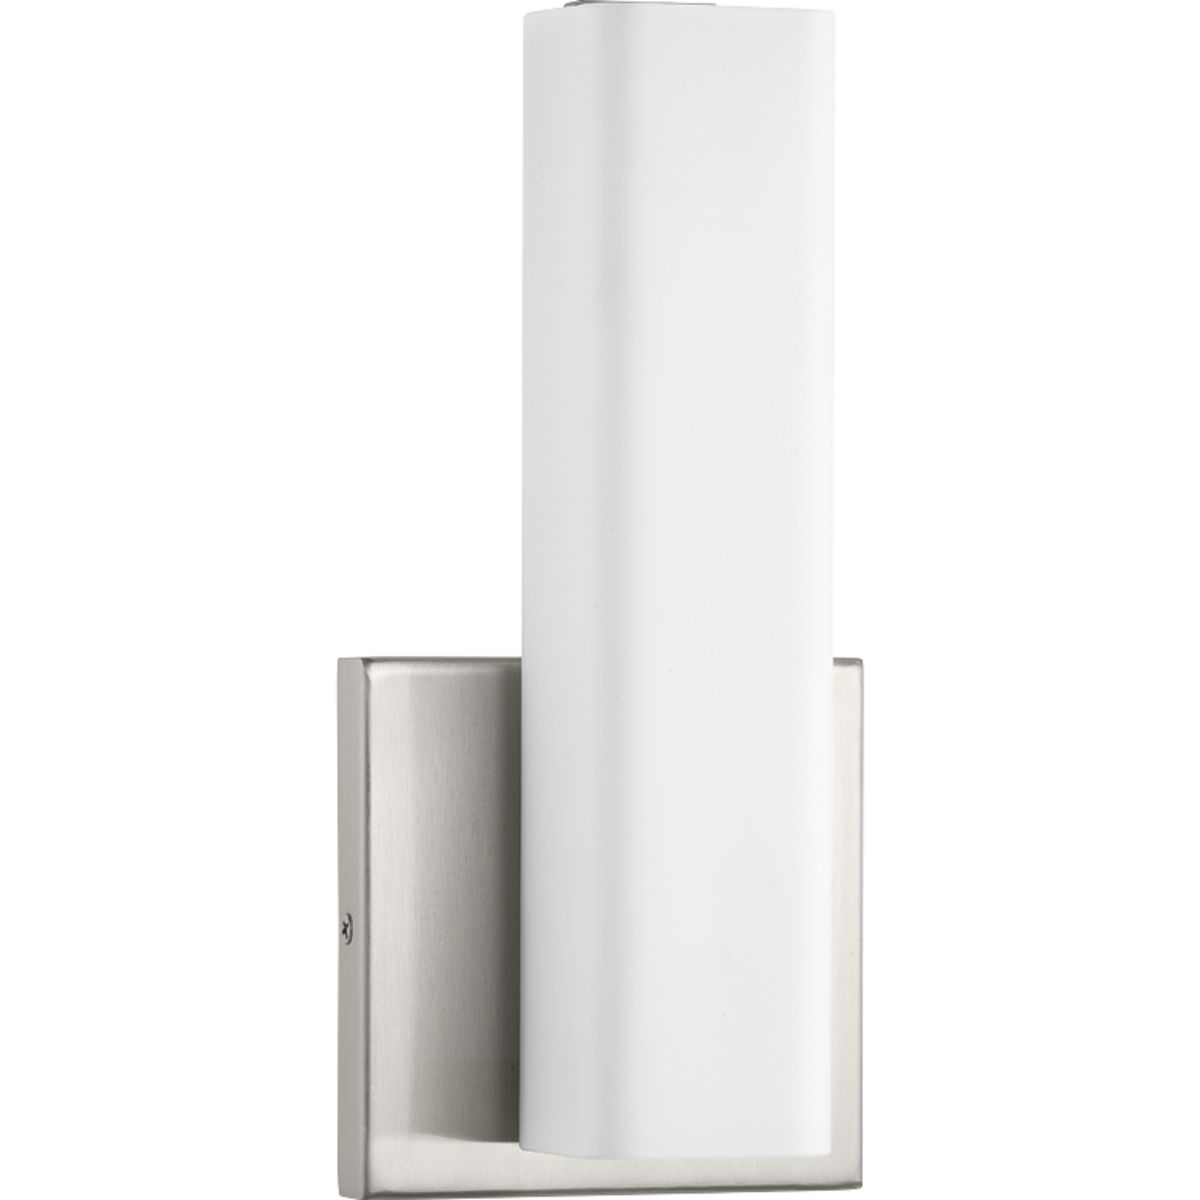 Beam LED vanity and sconces feature a squared, tubular opal glass diffuser paired with a simple, modern metal canopy. An integrated LED source provides a variety of energy and cost savings benefits. Suitable for residential and commercial applications. One-Light LED Wall Bracket. Brushed Nickel finish.